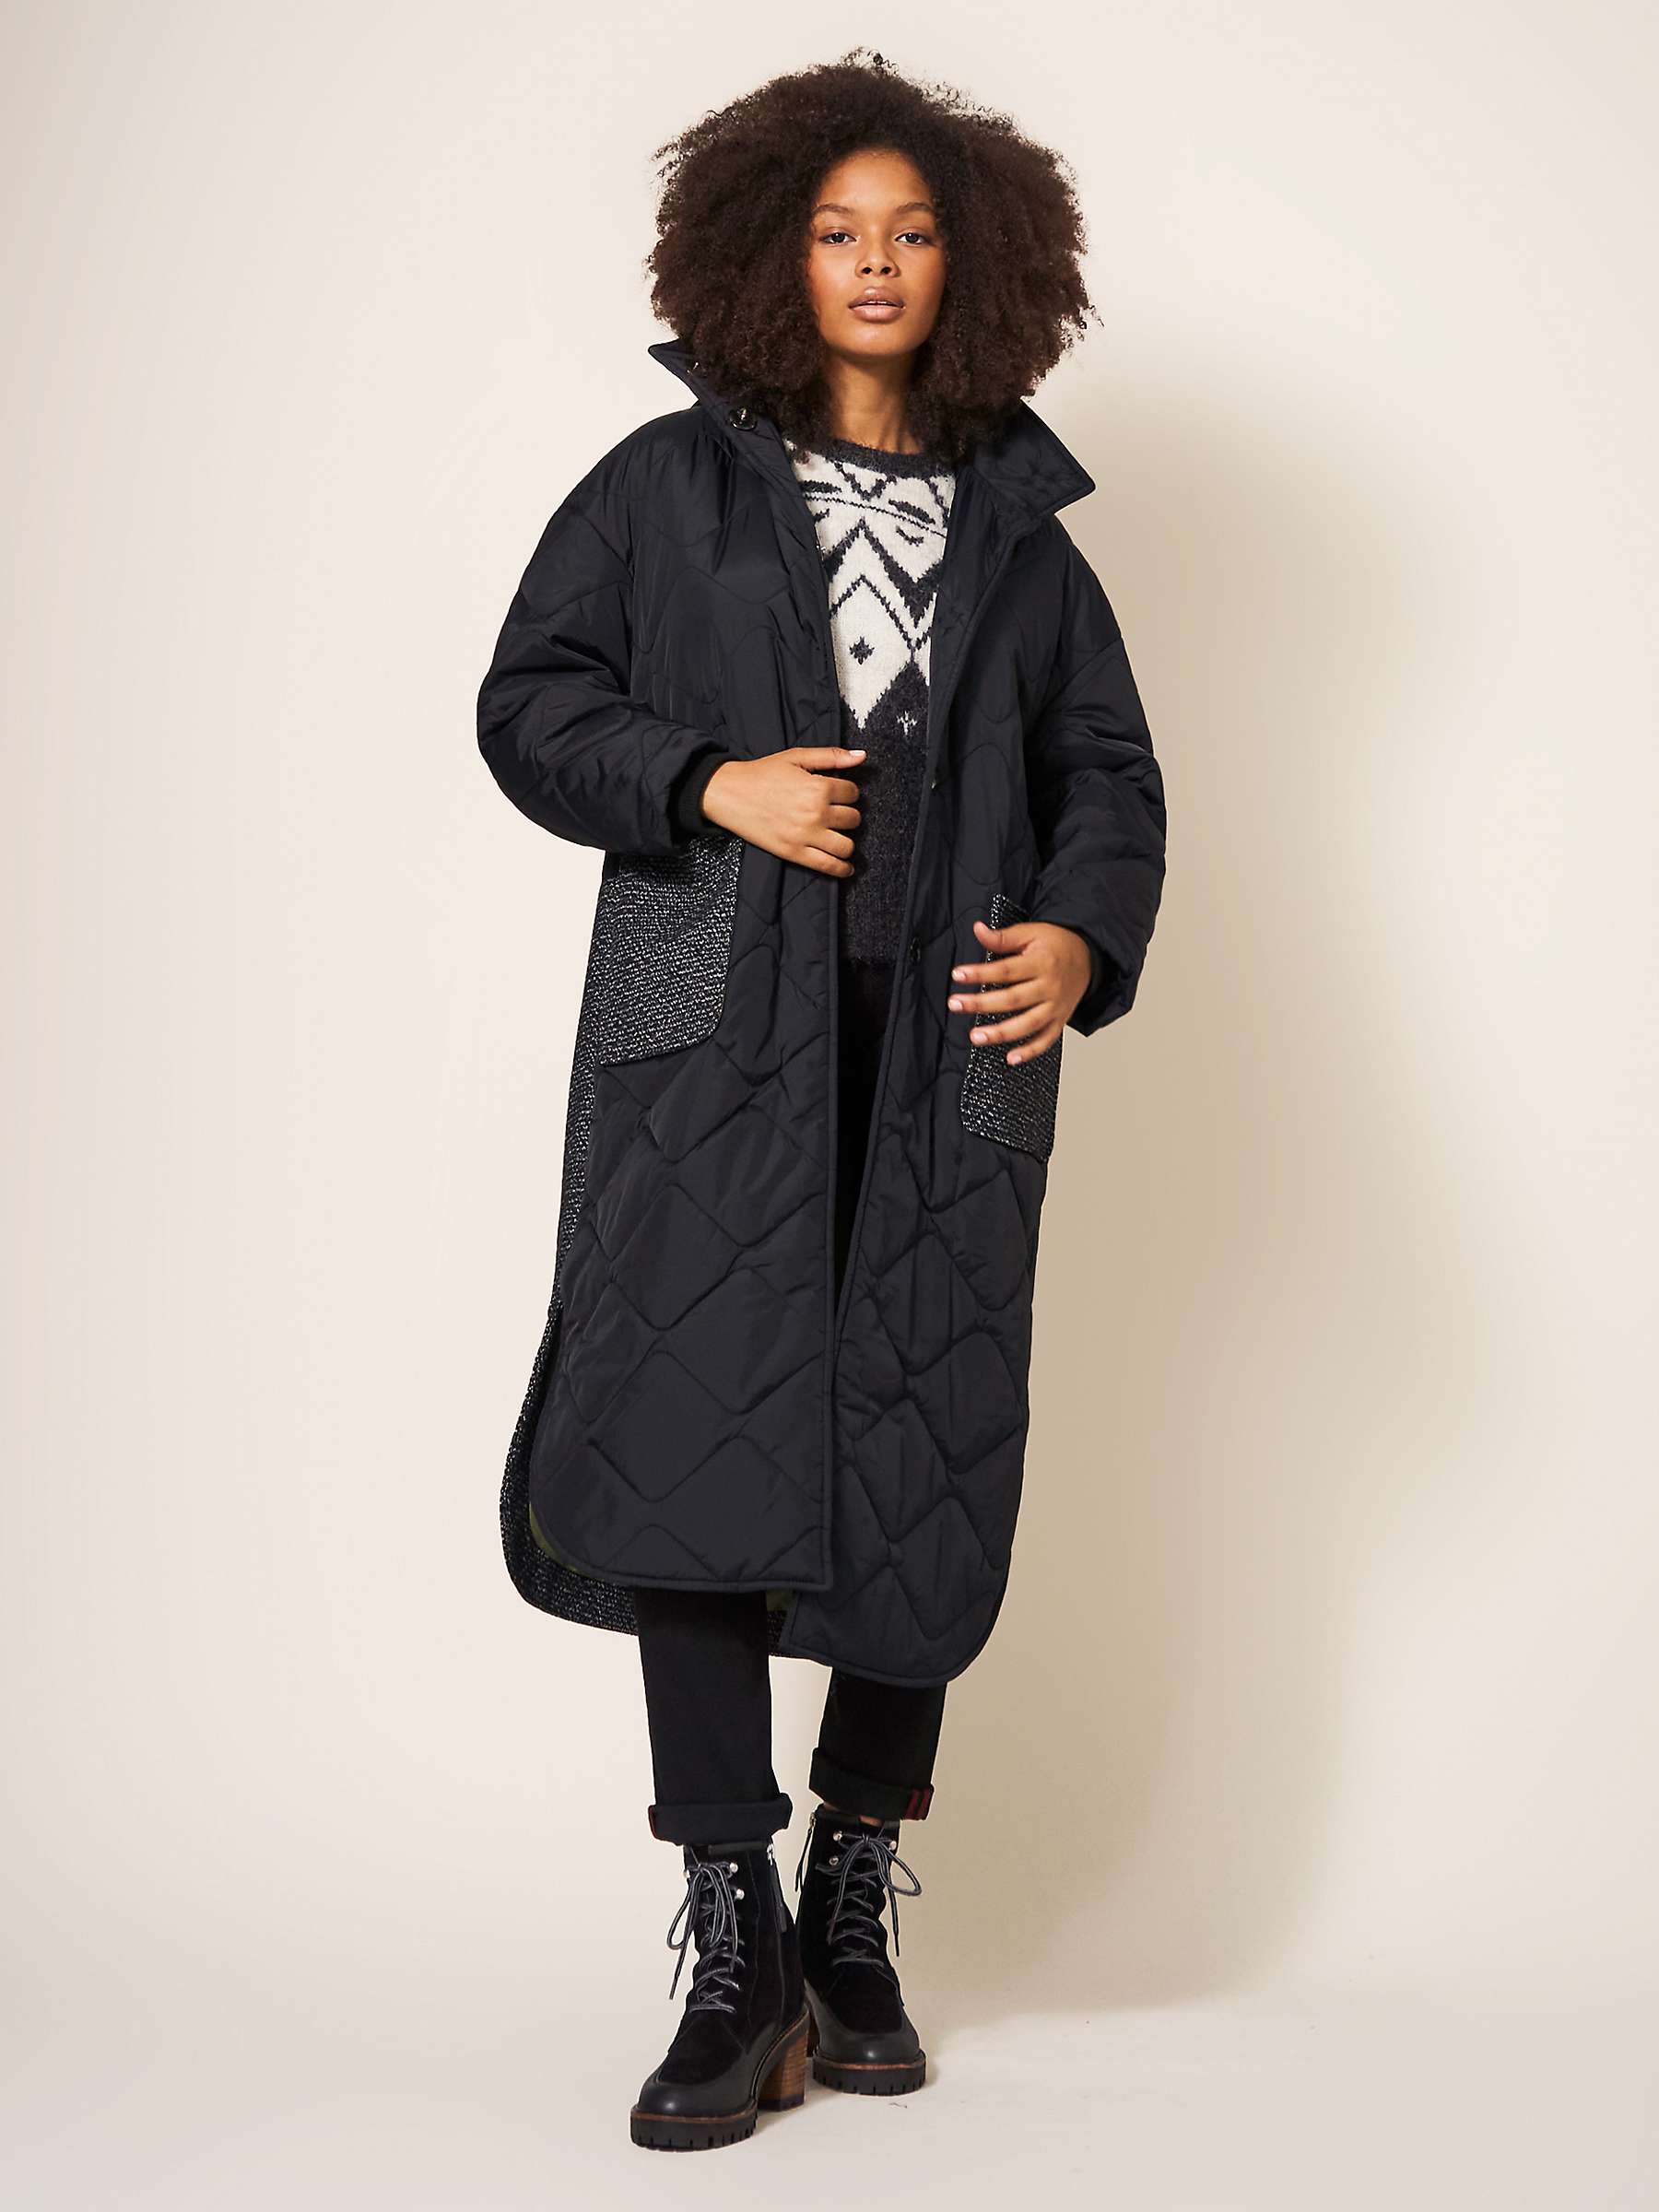 Buy White Stuff Mix Long Quilted Coat, Black Online at johnlewis.com